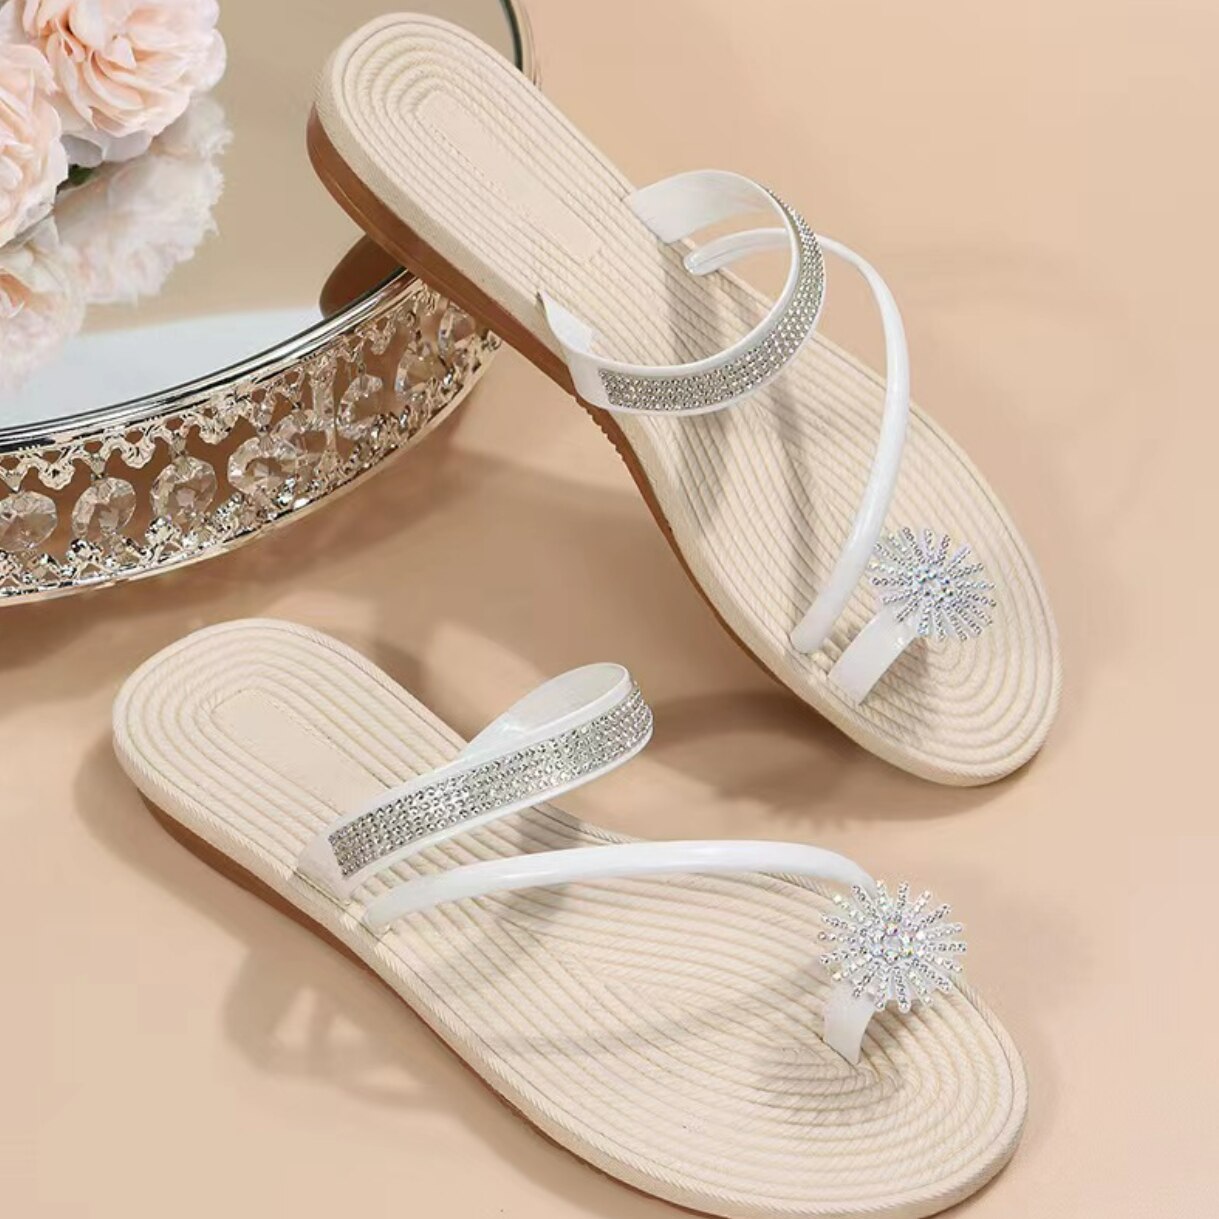 Ddbos Flat Sandals for Women Dressy Summer Sparkly Rhinestone Slide Beach Shoes Women's Dress Shoes Bling Trendy Ladies Sandals